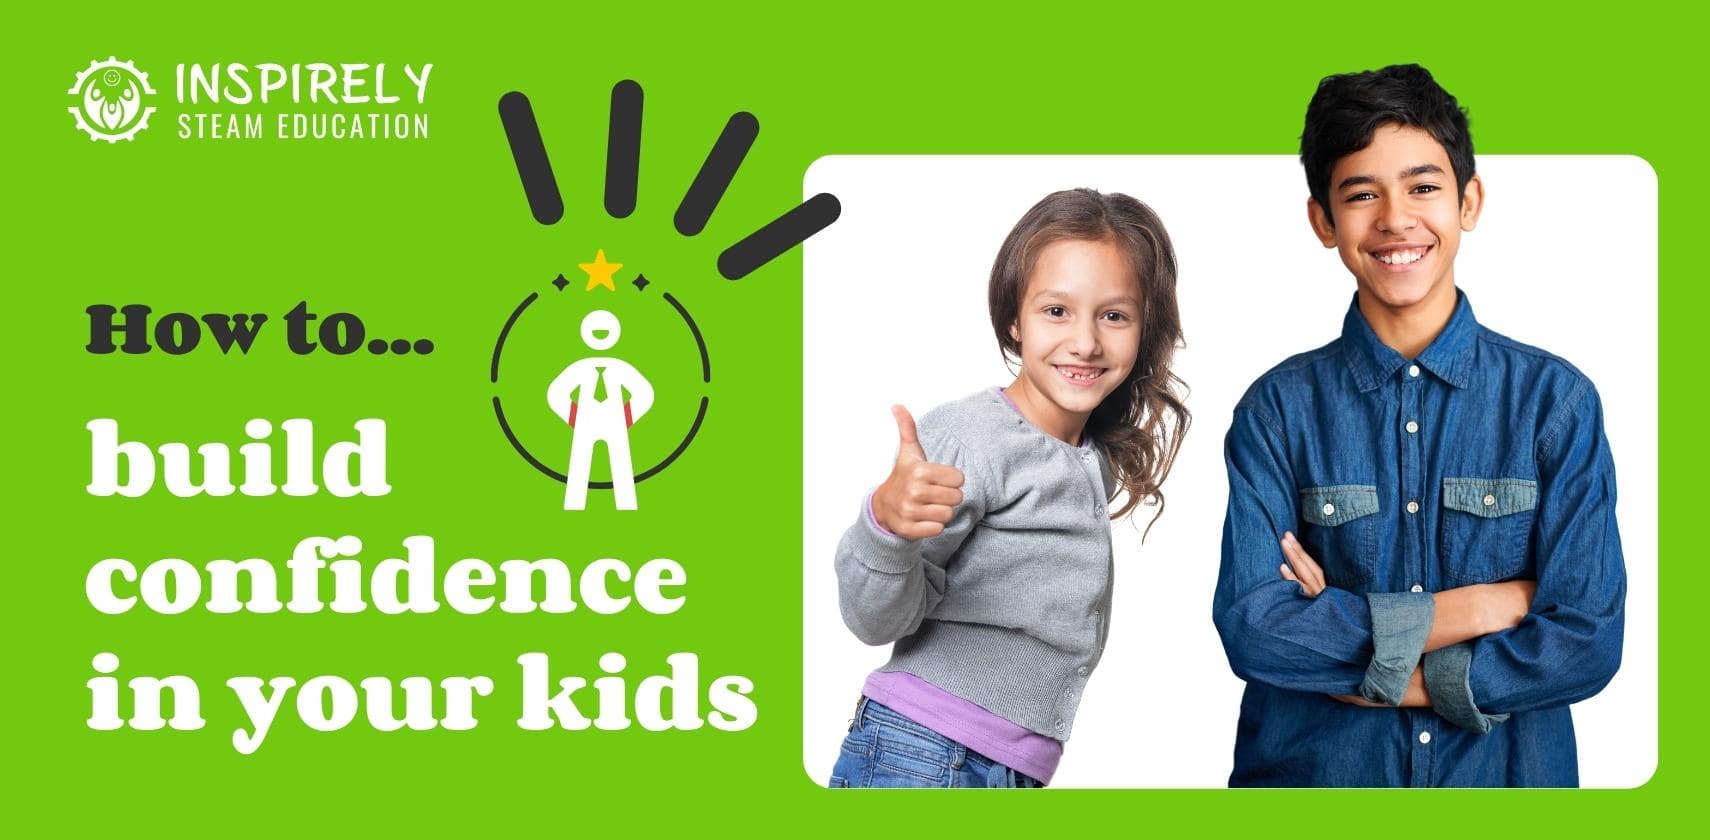 8 Ways to Build Confidence in Your kids - Inspirely | STEAM Education